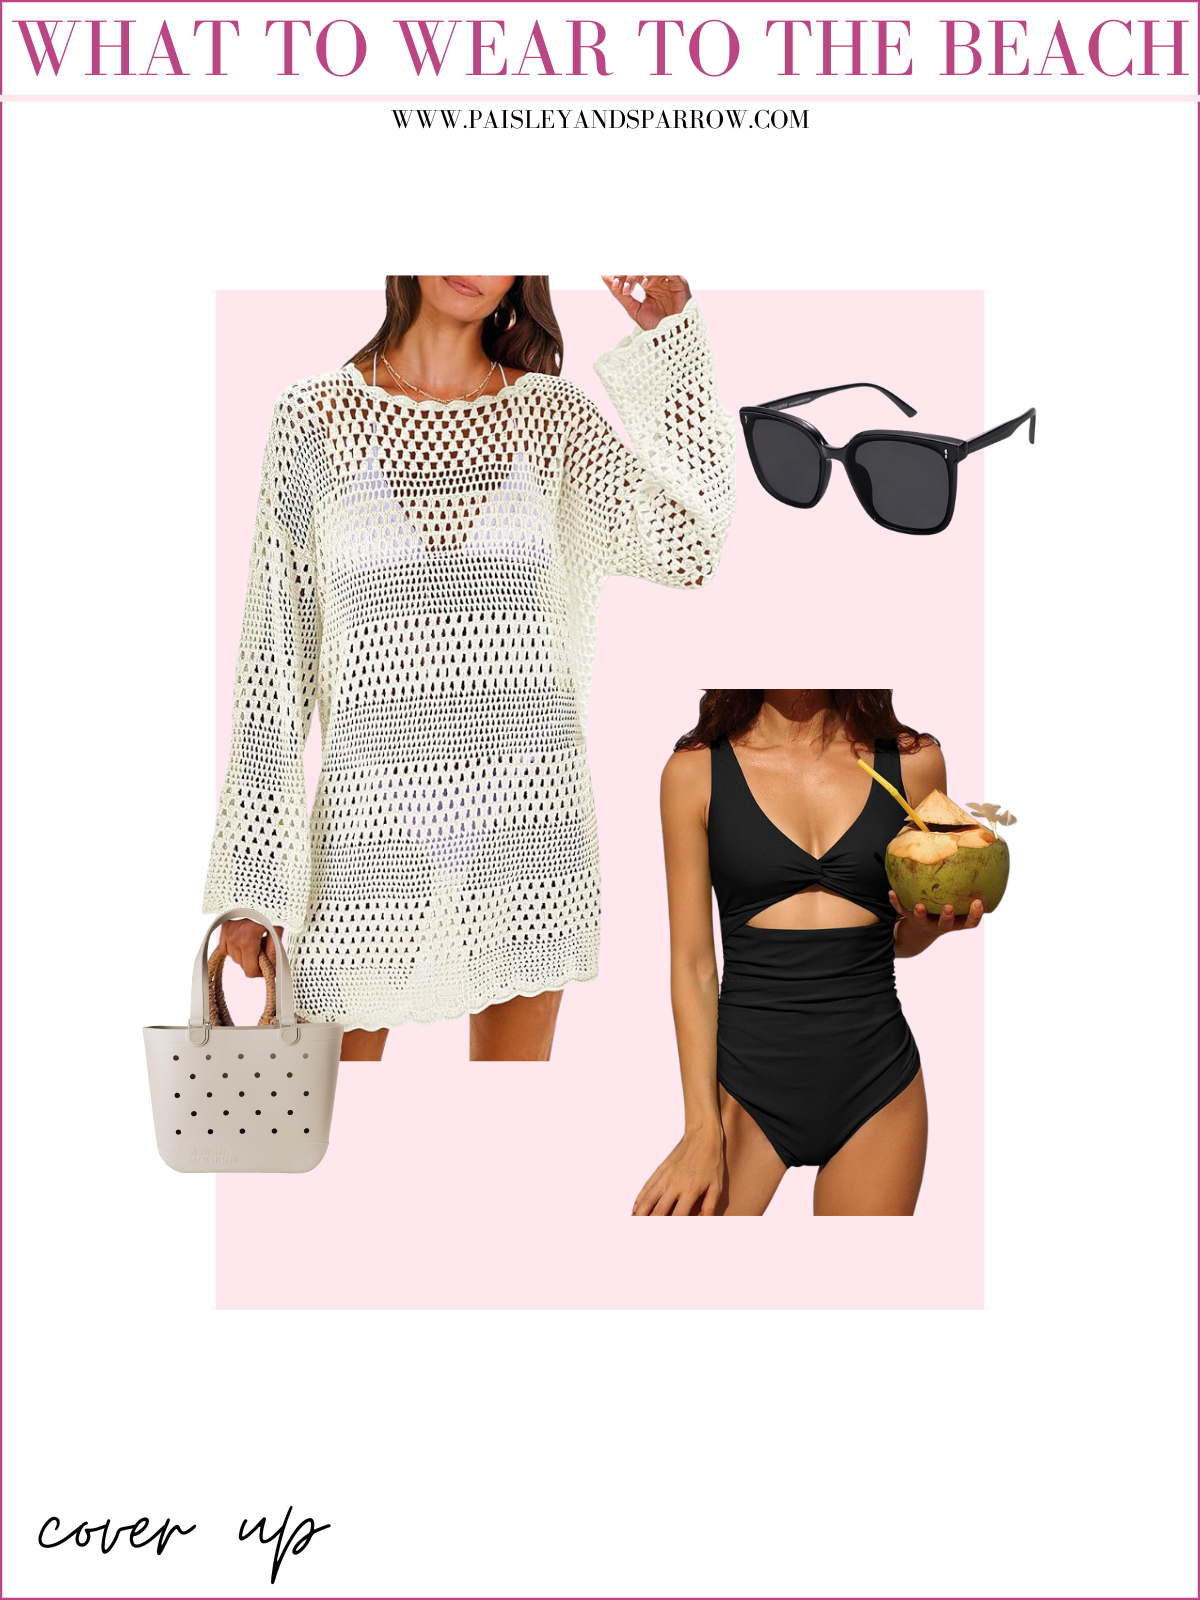 what to wear to the beach - swimsuit and coverup